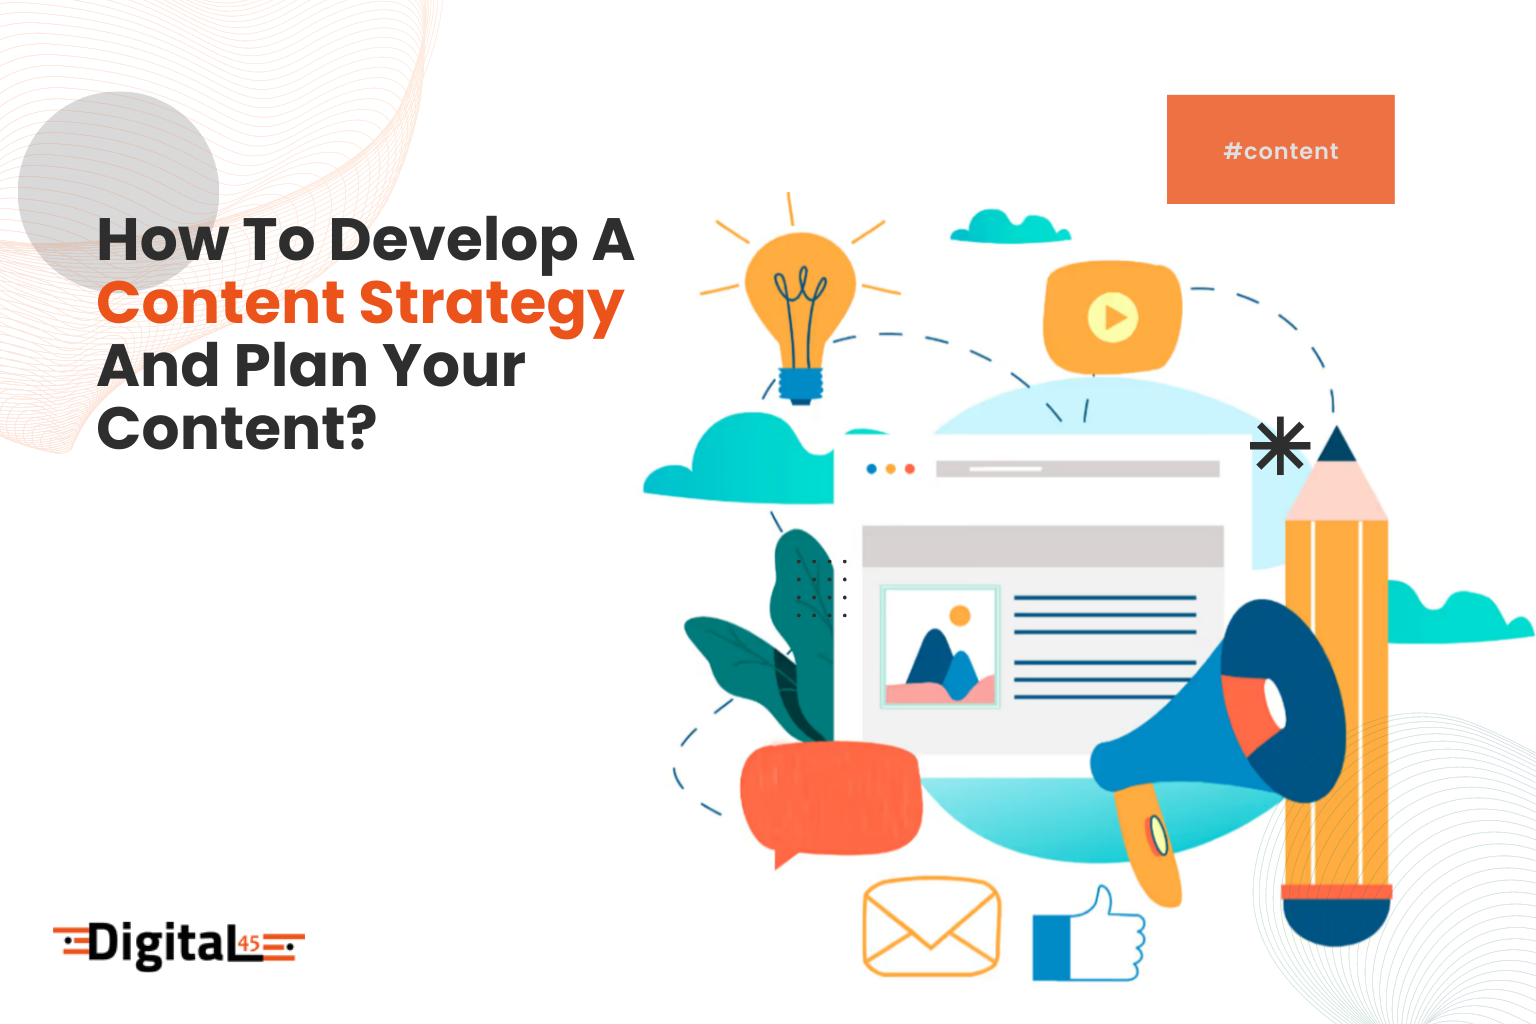 How To Develop A Content Strategy And Plan Your Content